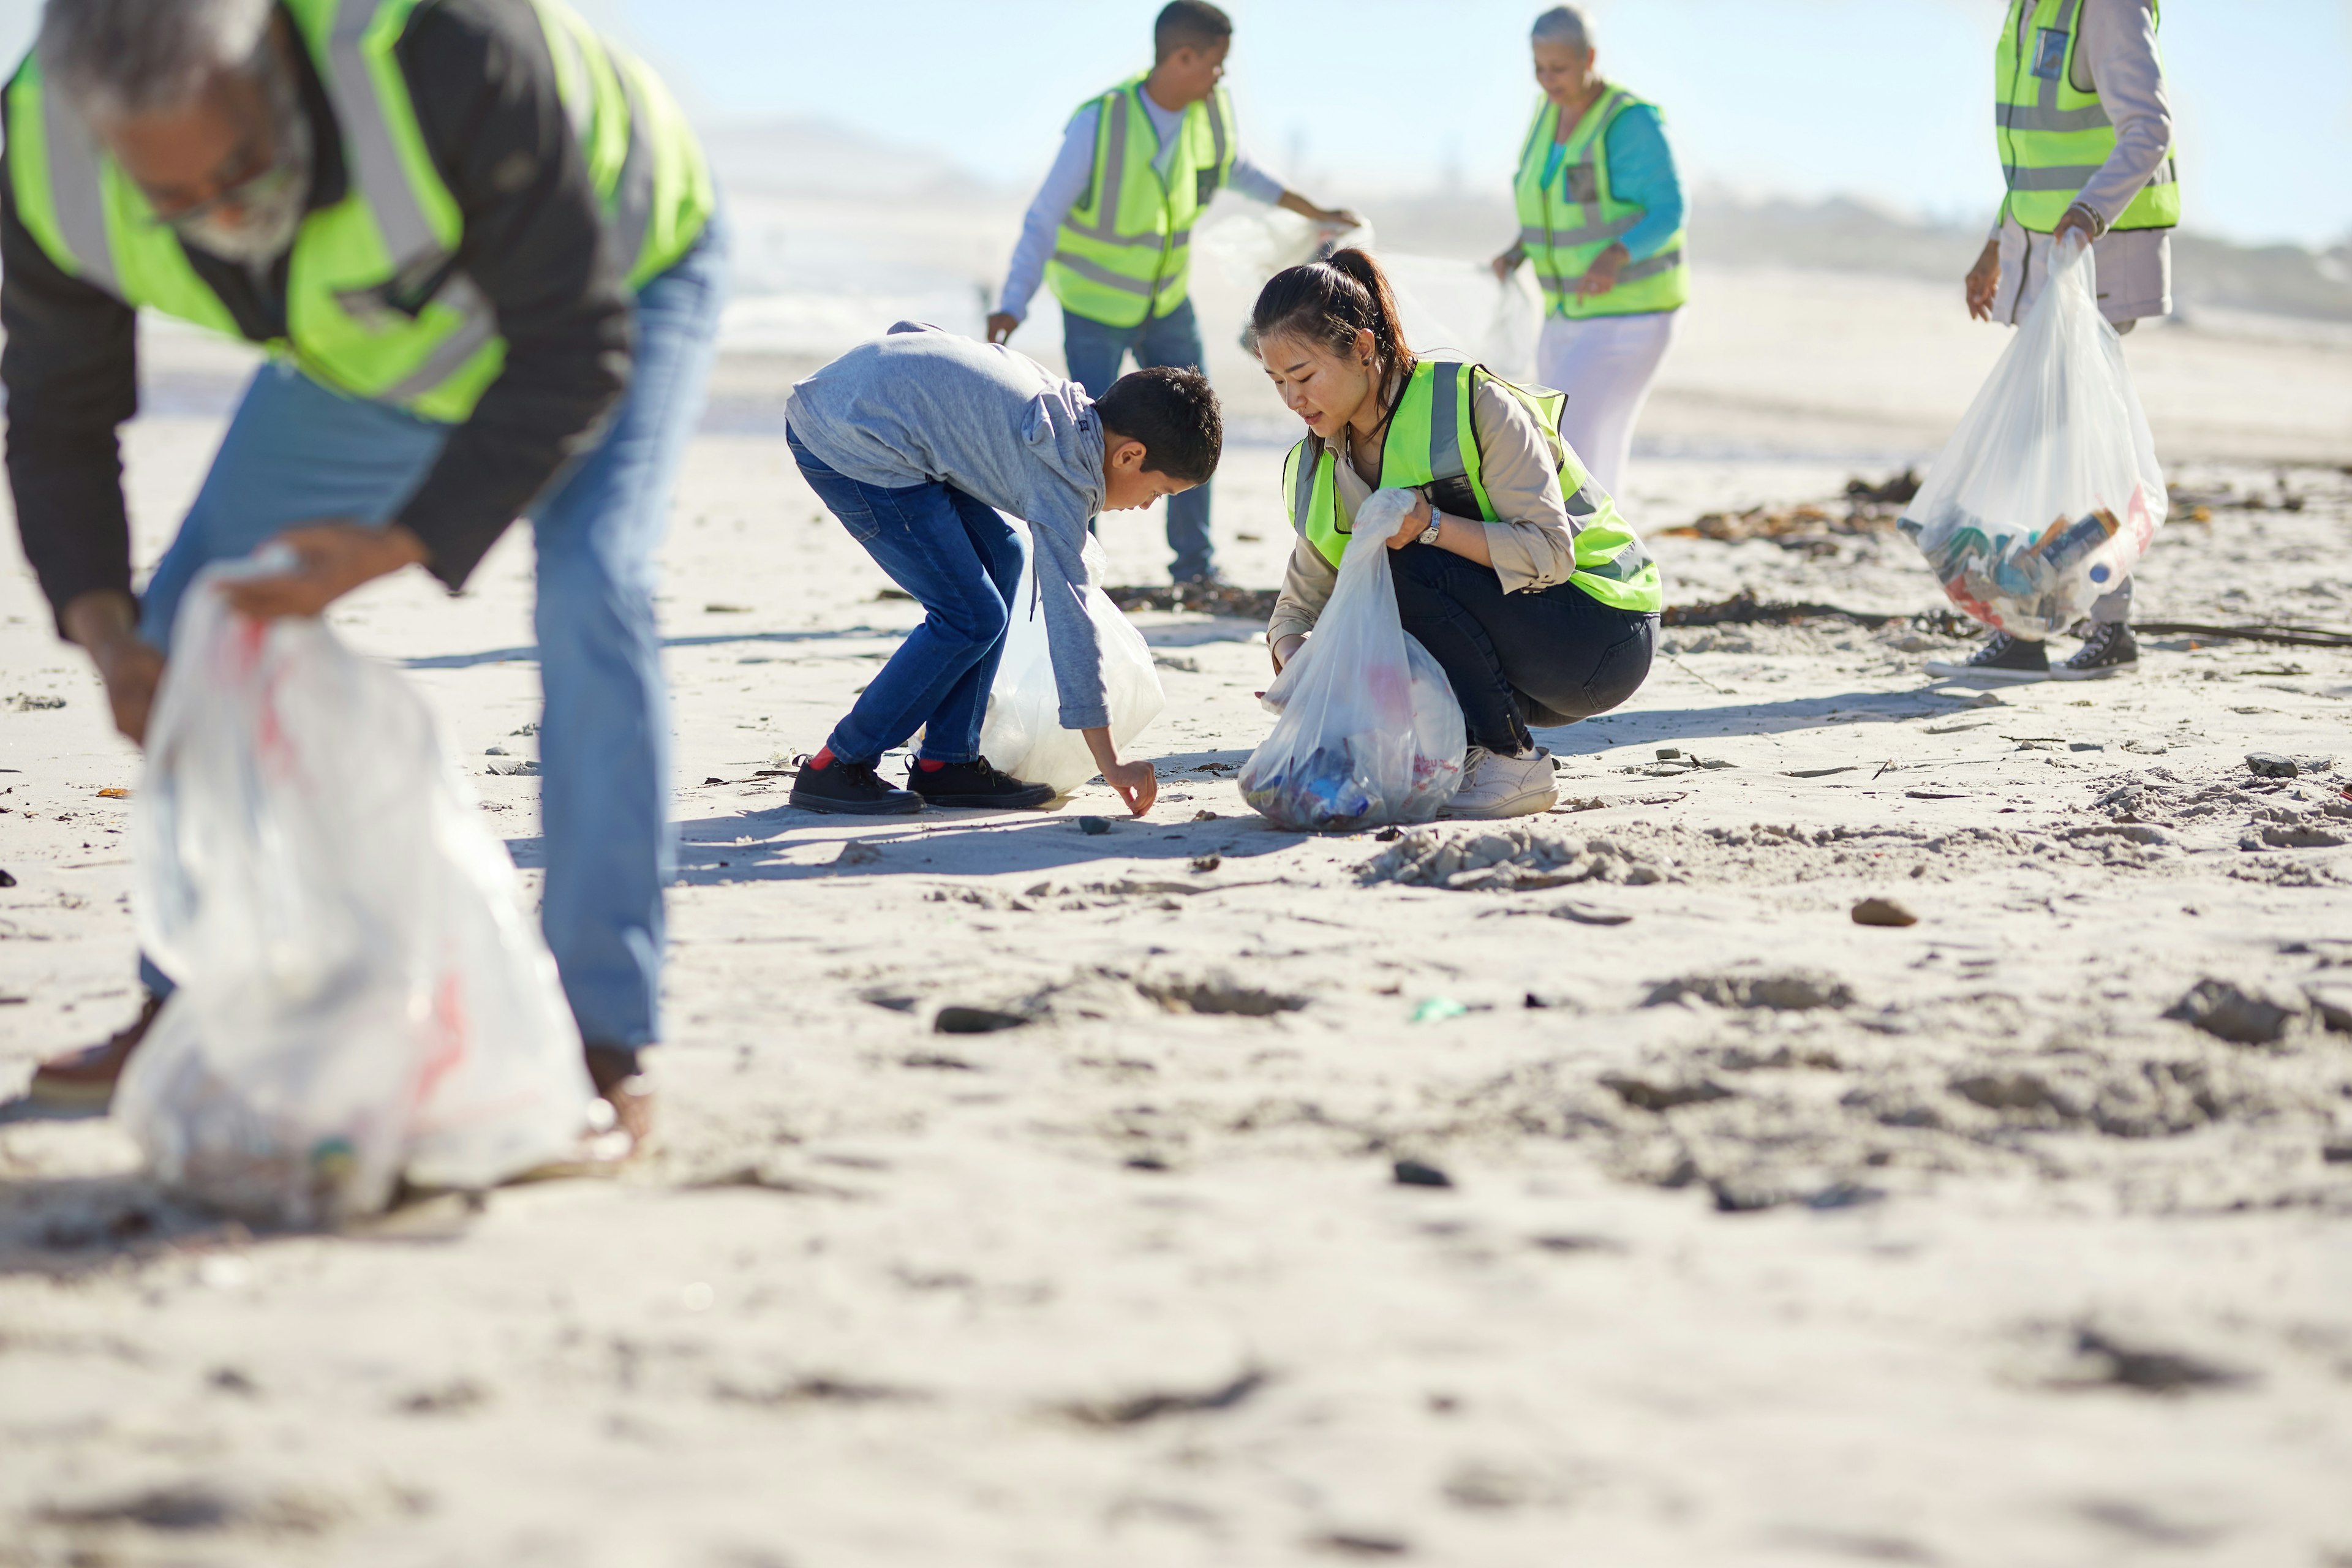 Mother and son with other volunteers cleaning up litter on a sunny, sandy beach.